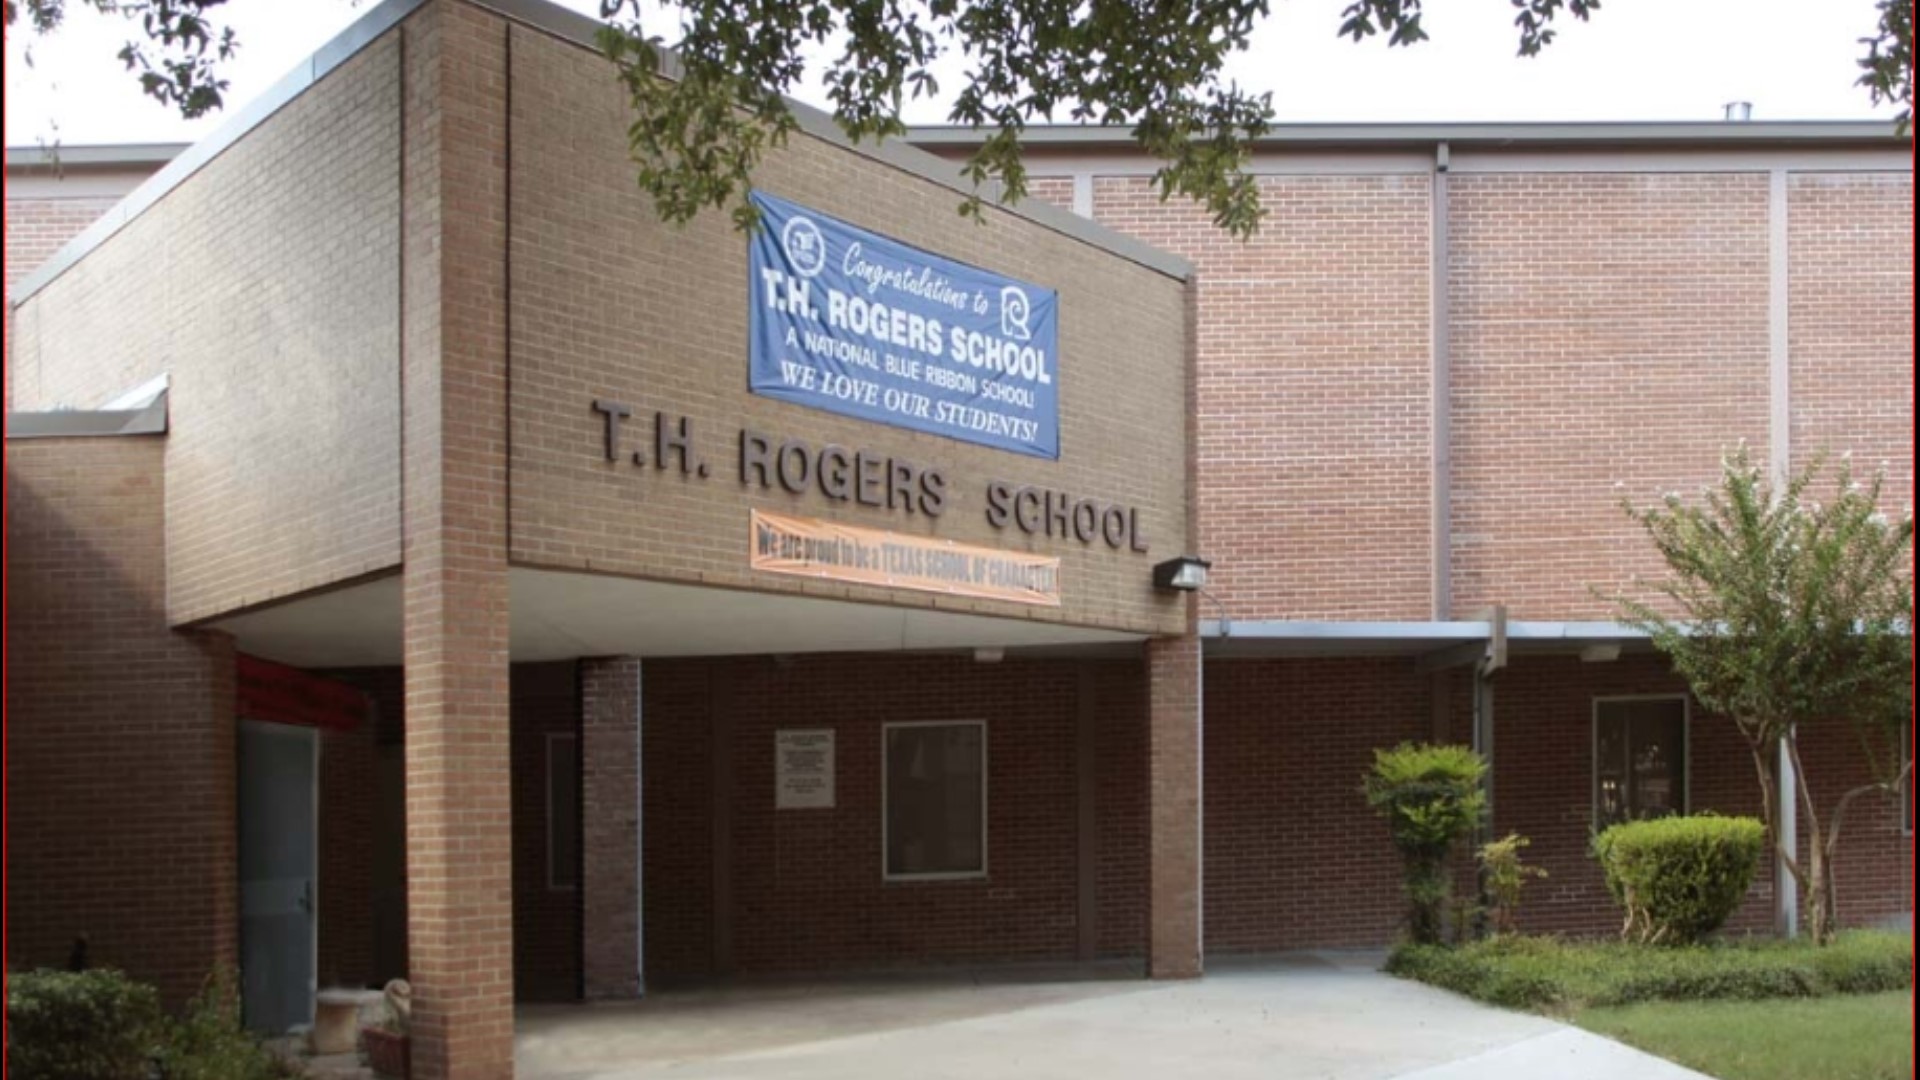 Many parents are outraged at Houston ISD’s plan to relocate severely disabled students from a shared school to various other campuses.